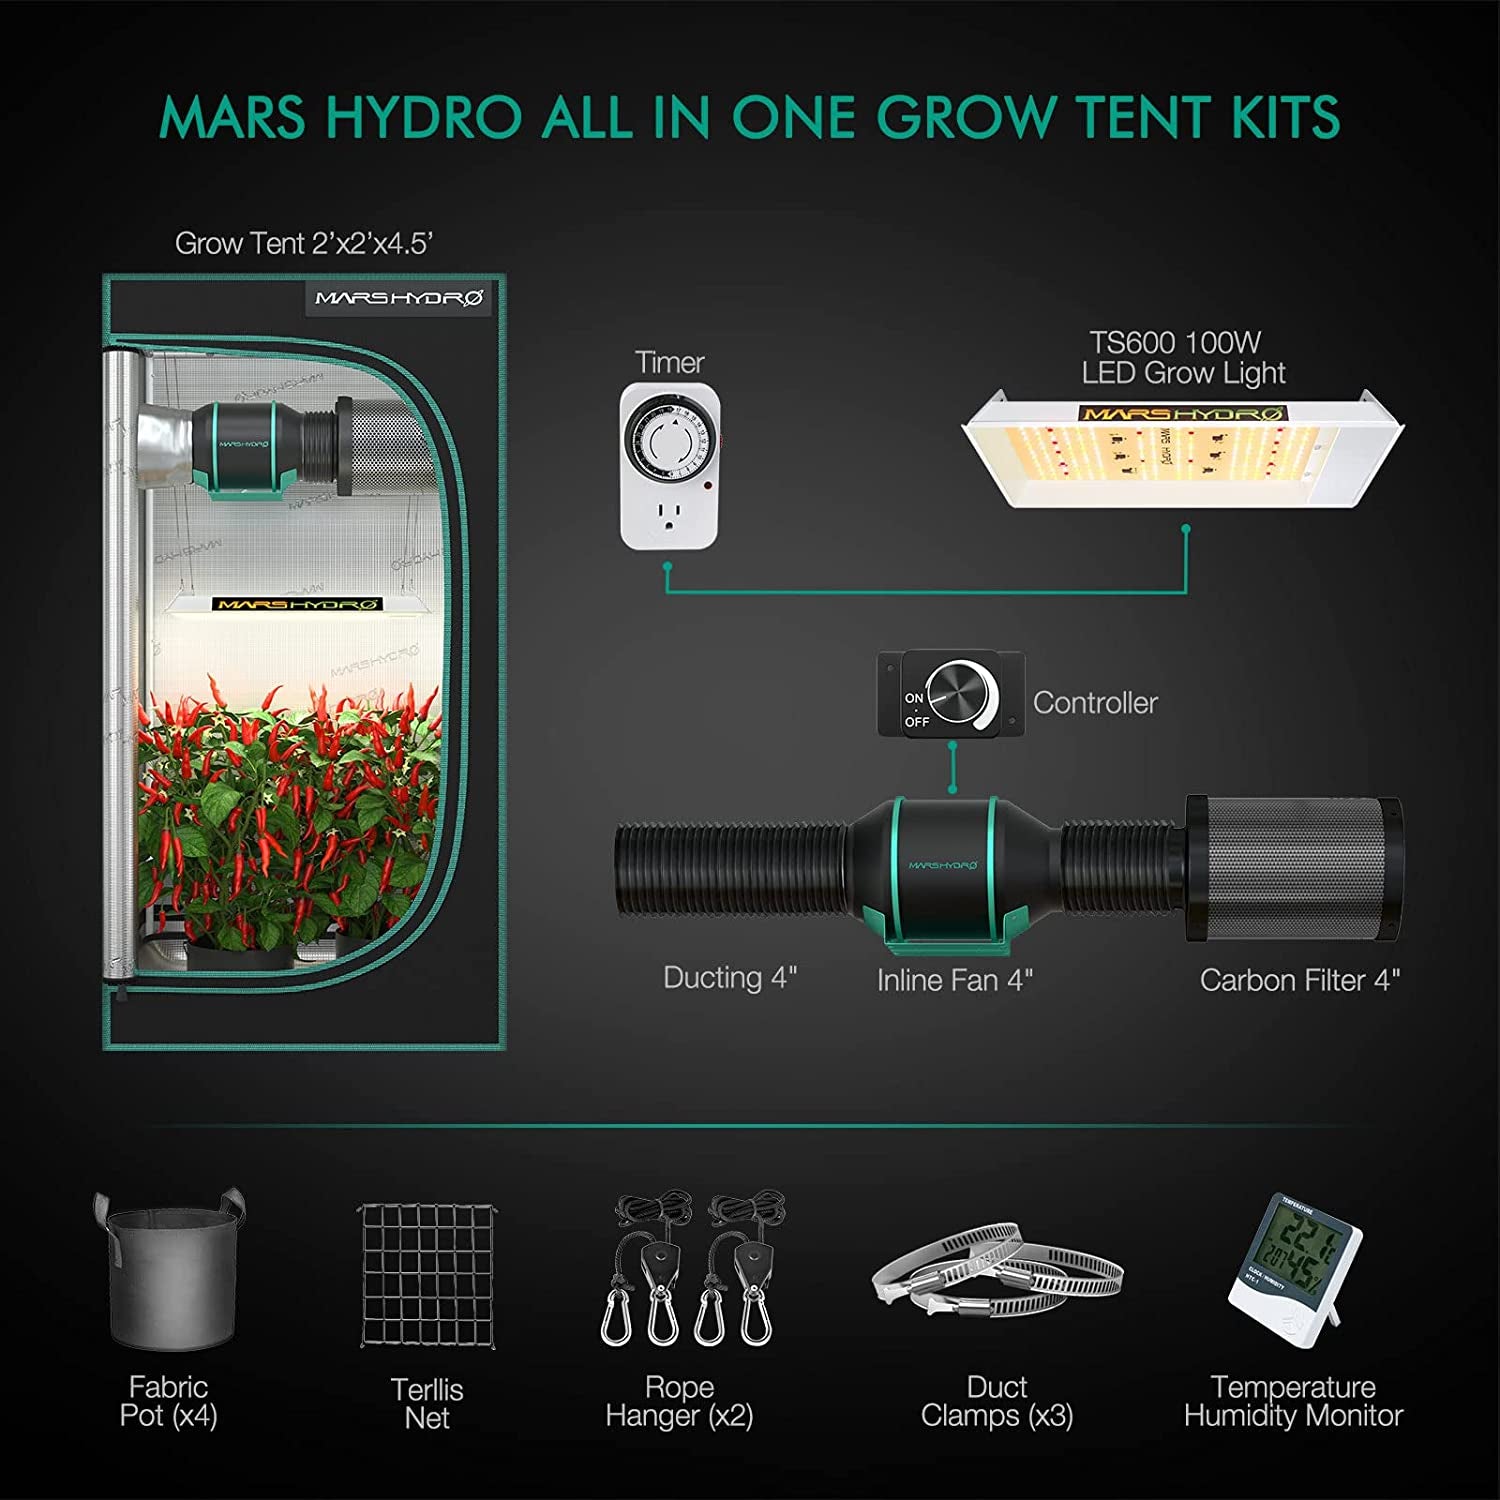 MARS HYDRO, MARS HYDRO 24''X24''X55'' Complete Grow Tent Kit TS 600W Full Spectrum LED Grow Lights 2X2Ft Lightproof High Reflective Grow Tent 4'' Ventilation Kit 200CFM Air Flow for Indoor Growing